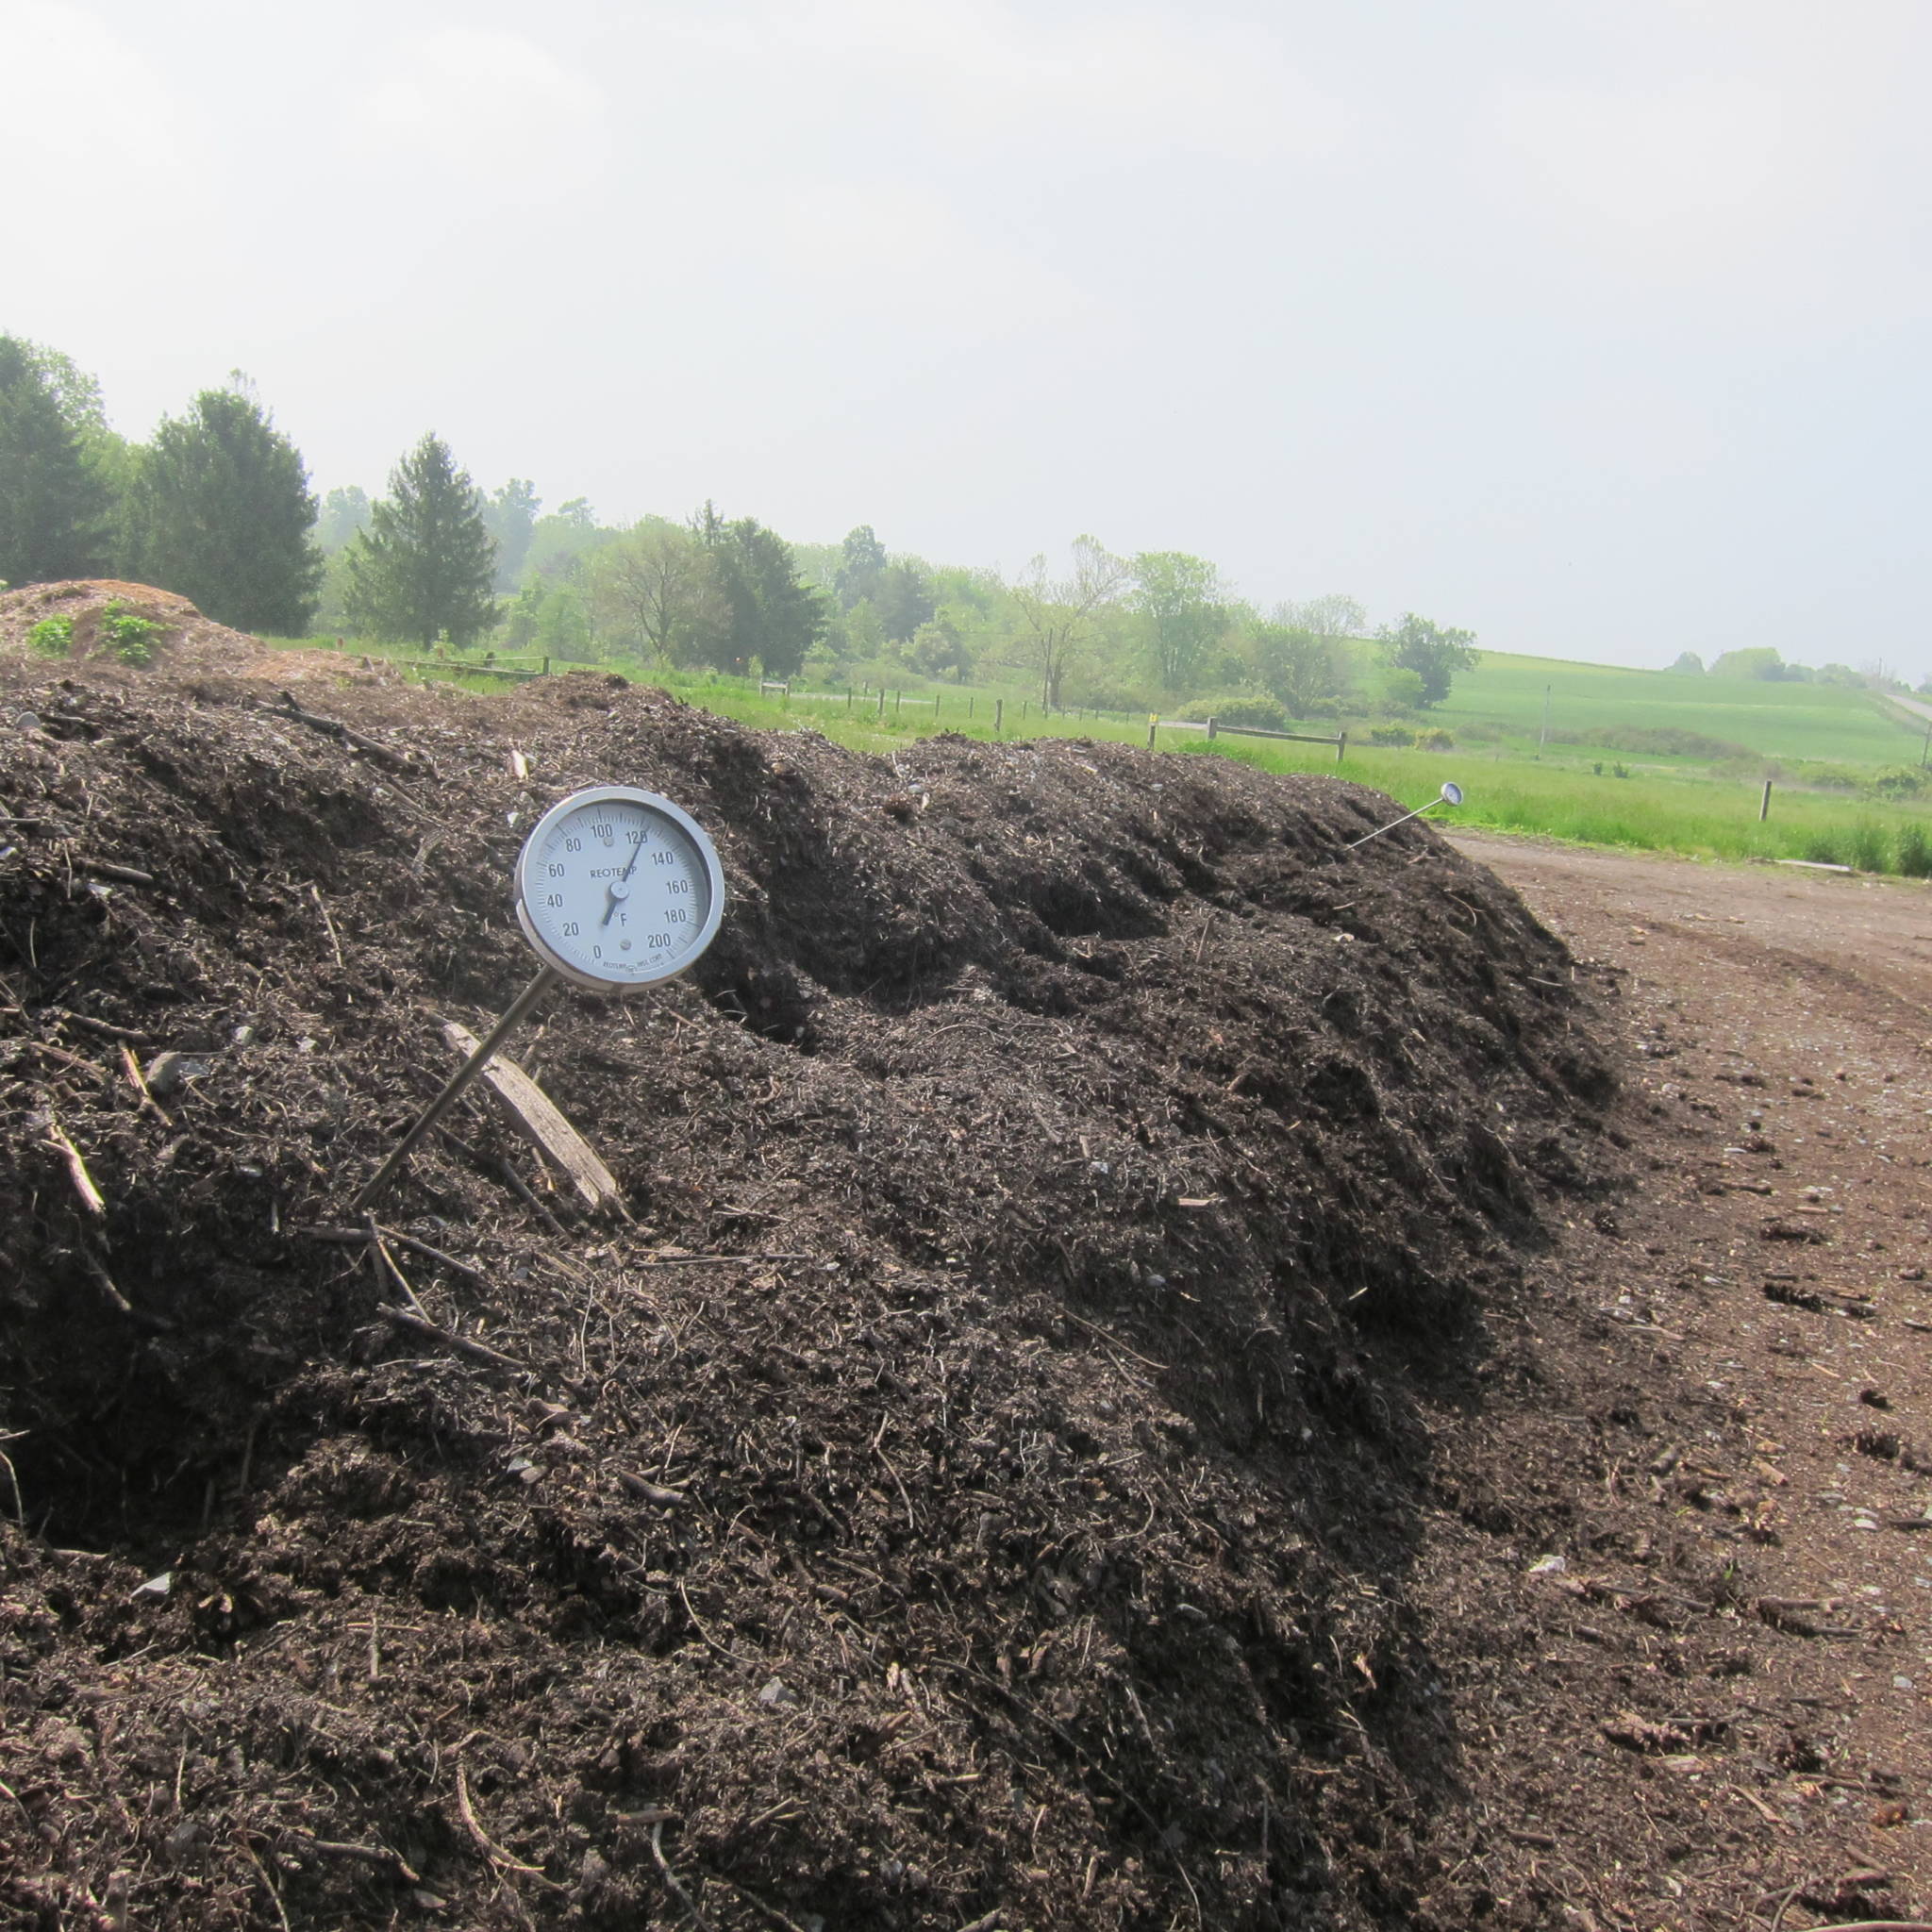 A thermometer placed into a compost pile out in nature